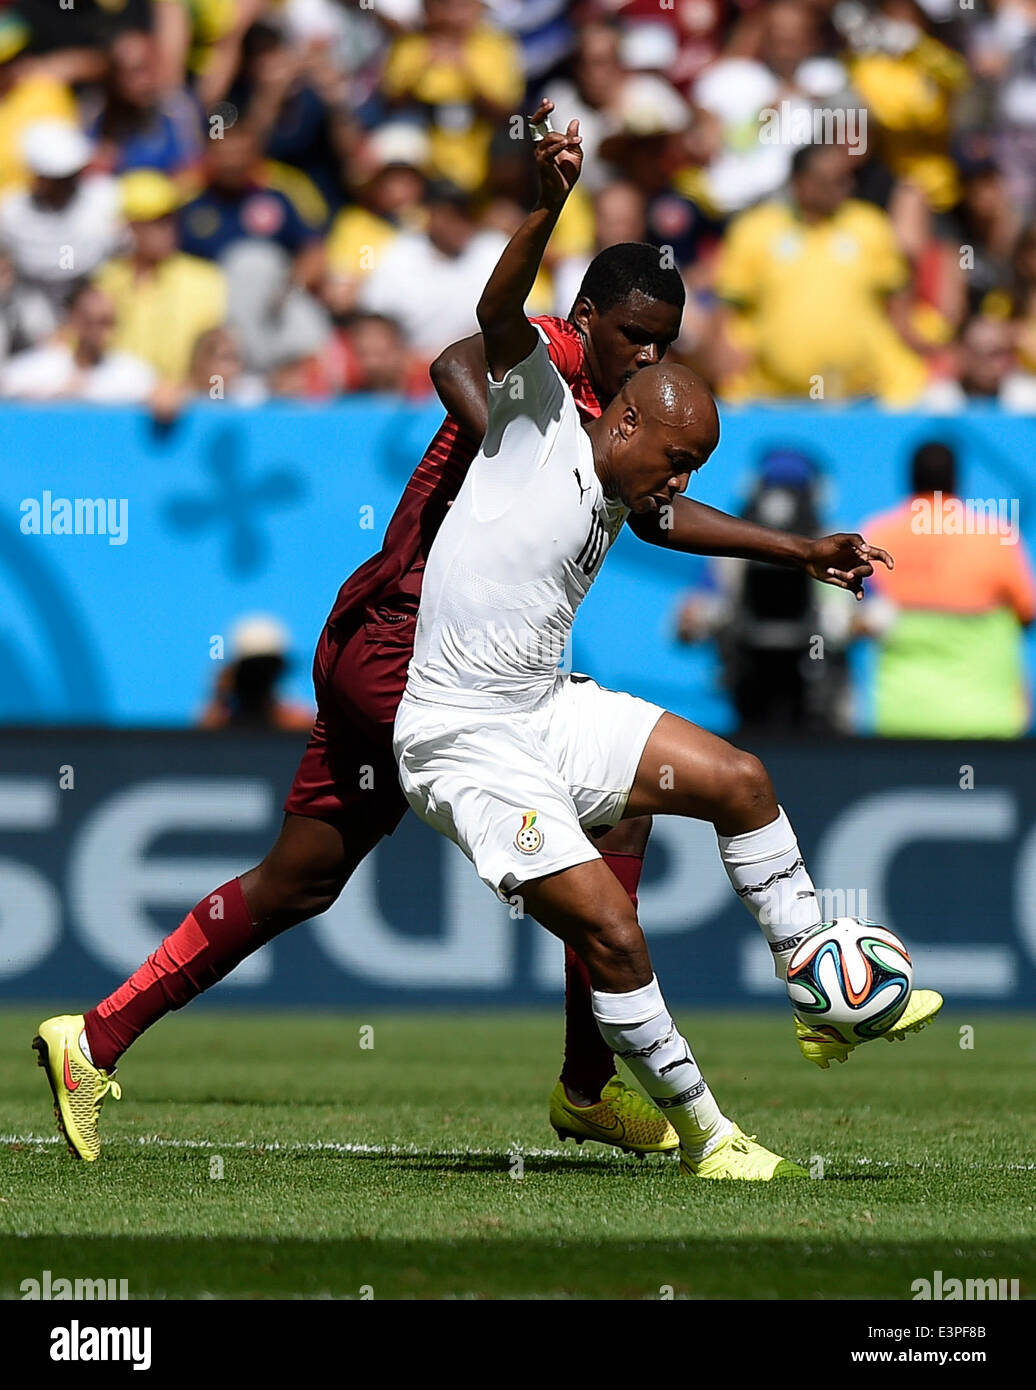 Brasilia, Brazil. 26th June, 2014. Ghana's Andre Ayew (front) vies with Portugal's William Carvalho during a Group G match between Portugal and Ghana of 2014 FIFA World Cup at the Estadio Nacional Stadium in Brasilia, Brazil, June 26, 2014. Portugal won 2-1 over Ghana on Thursday. © Qi Heng/Xinhua/Alamy Live News Stock Photo